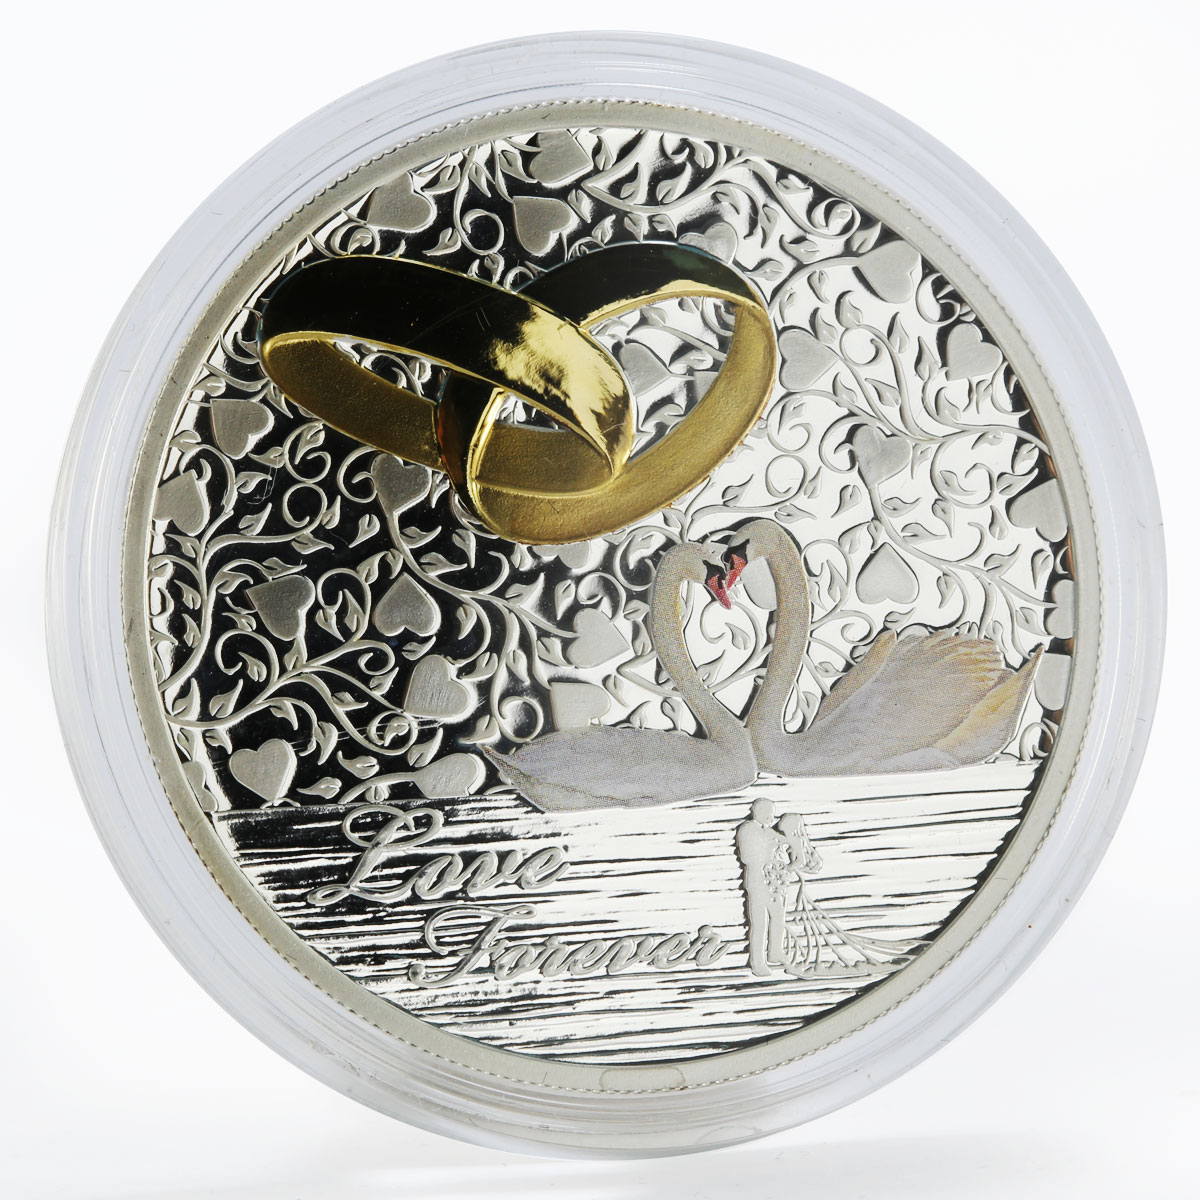 Tanzania 1000 shillings Love Forever wedding colored proof silver coin 2014